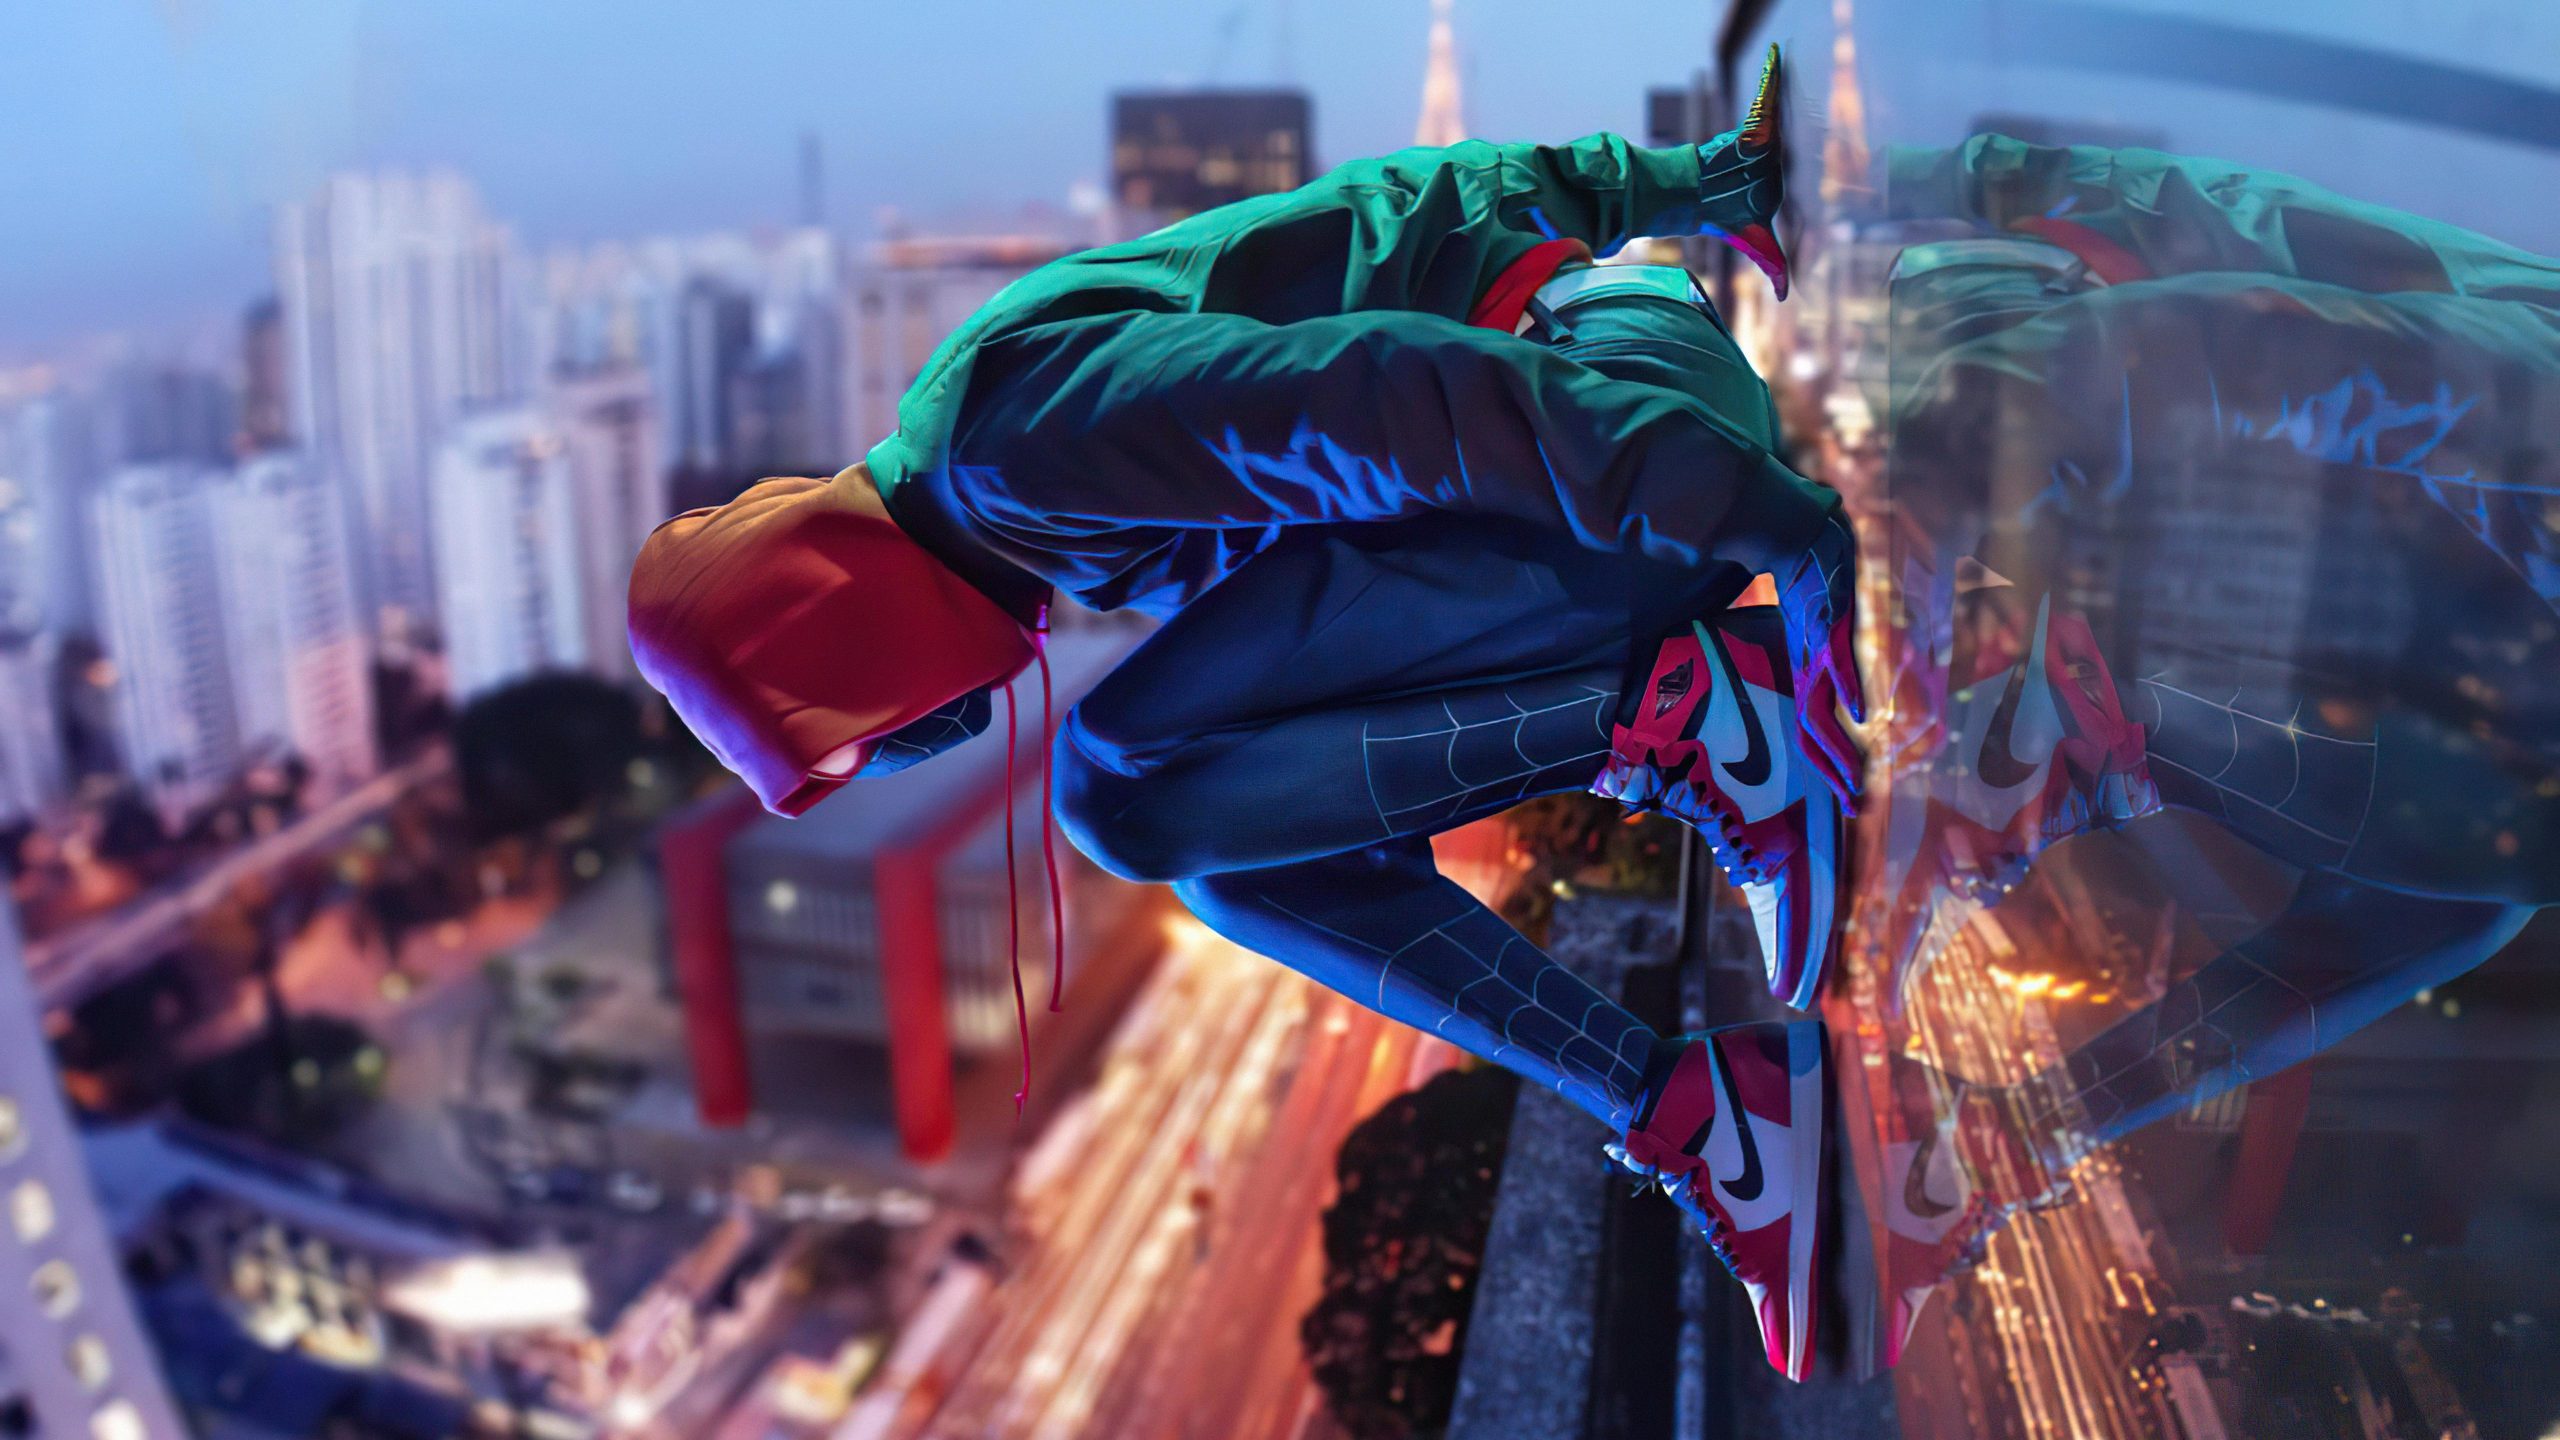 Miles Morales 4k PC Wallpapers For Free, Miles Morales 4k PC, Movies